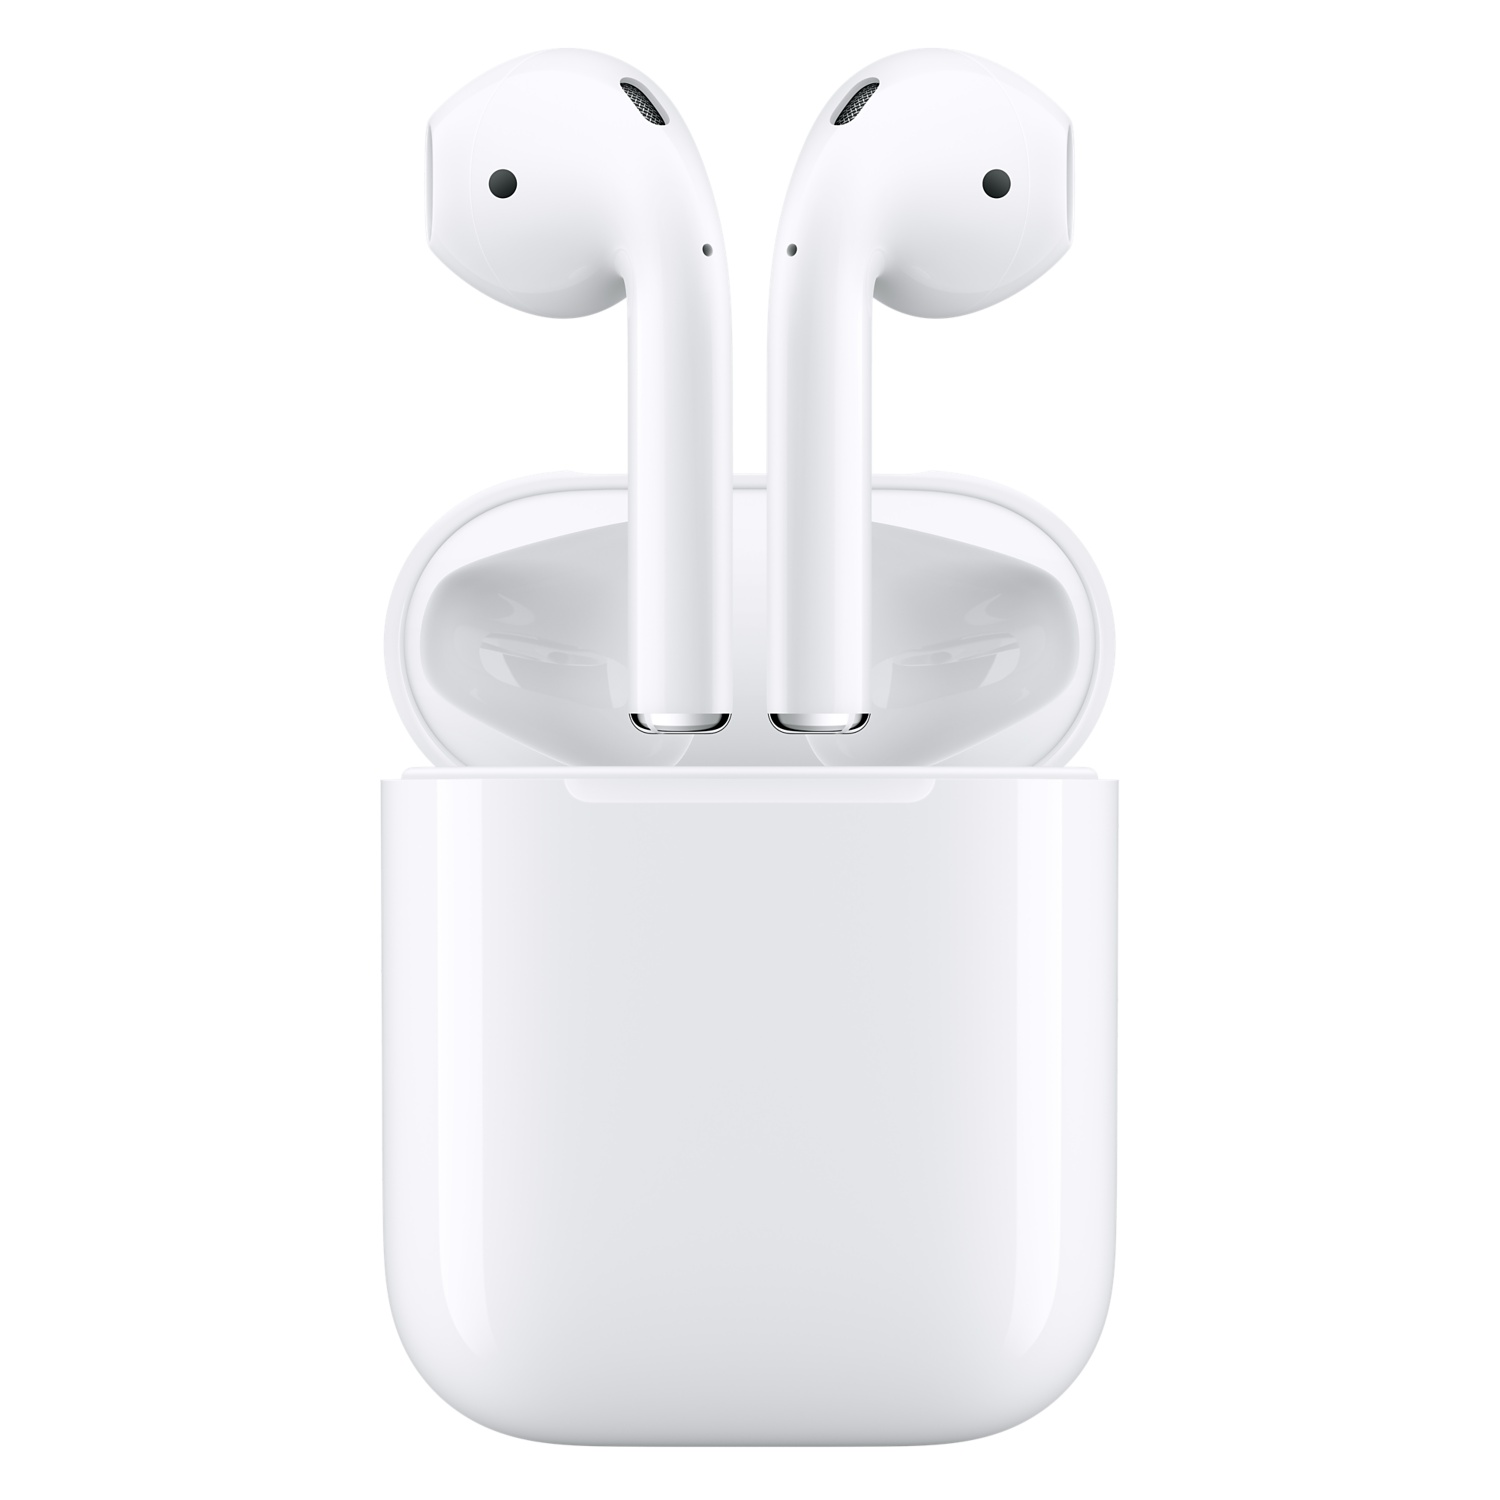 Apple Airpods and case